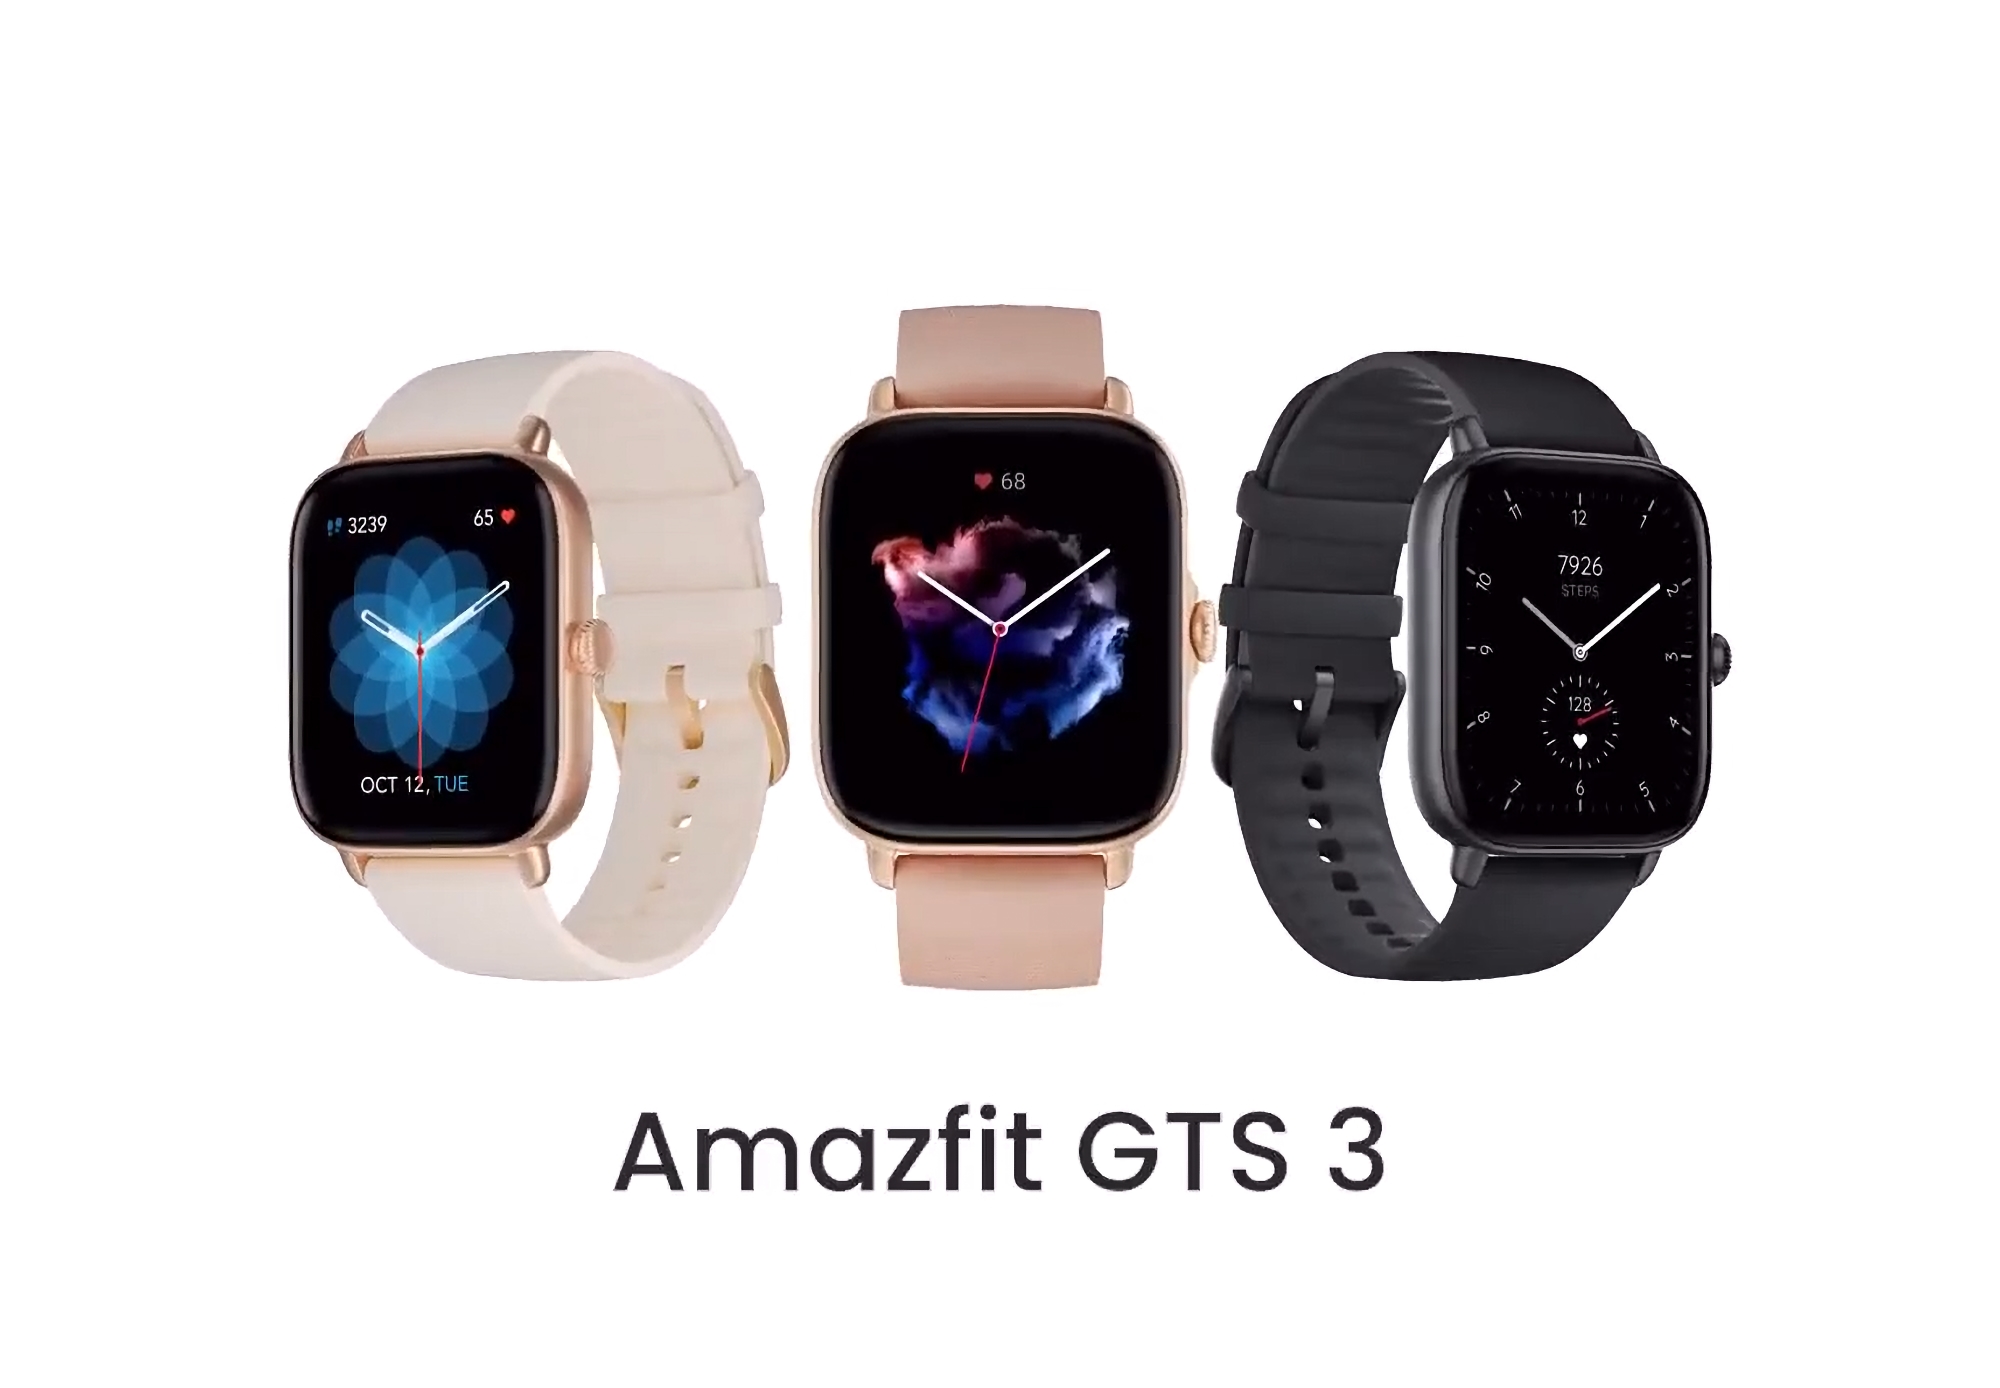 Limited time deal: Amazfit GTS 3 on Amazon for $30 off